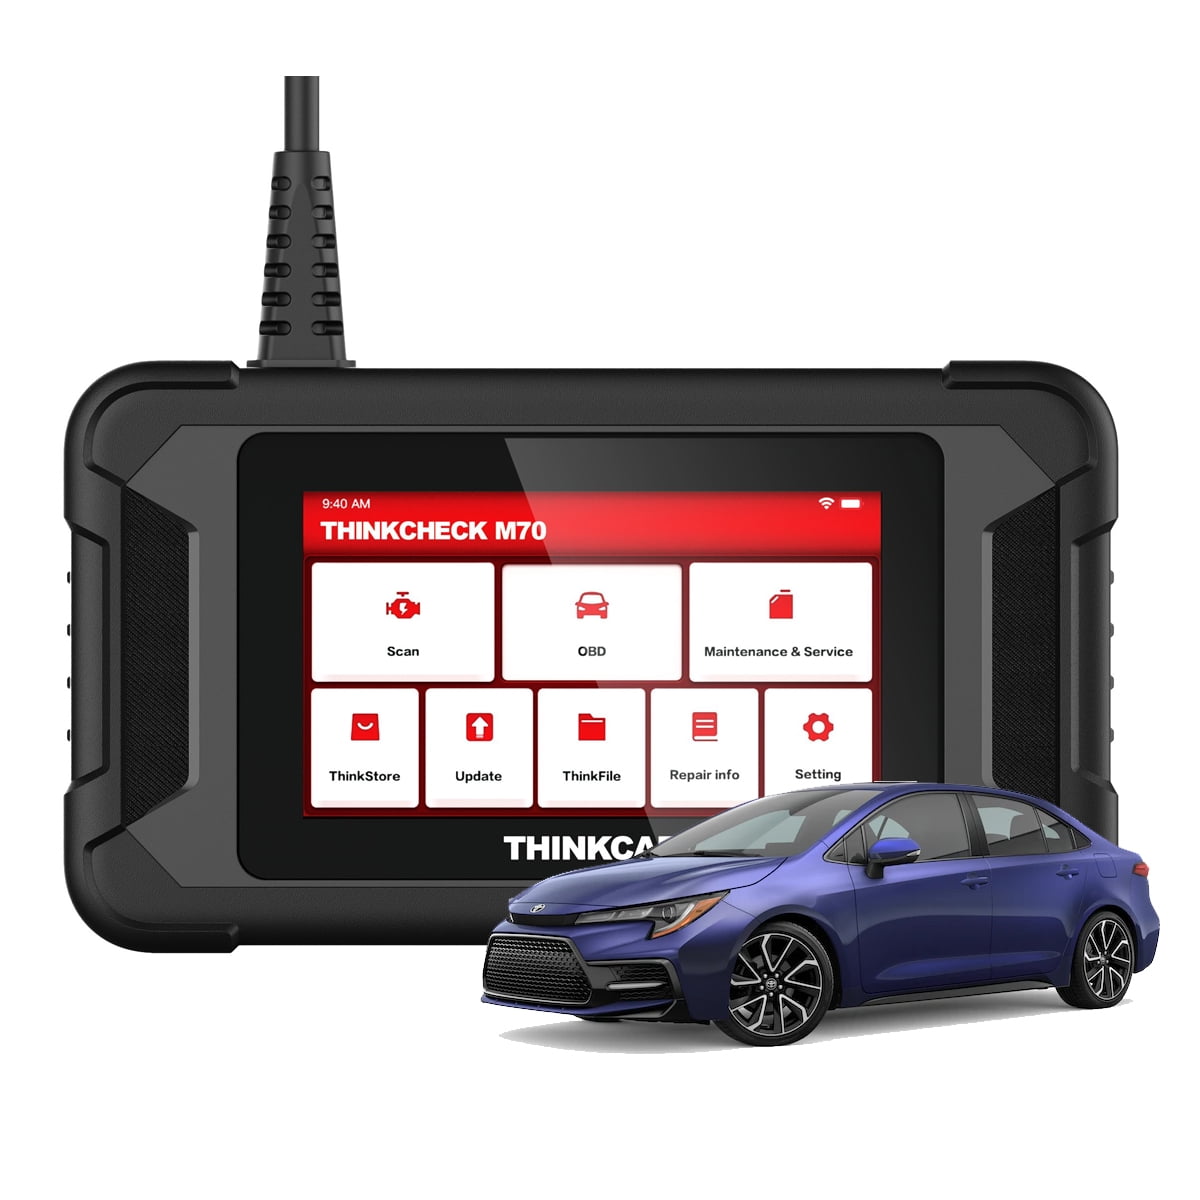 iCarsoft Mercedes MB V2 Diagnostic Scan Tool FULL System 2019 Extra Features 